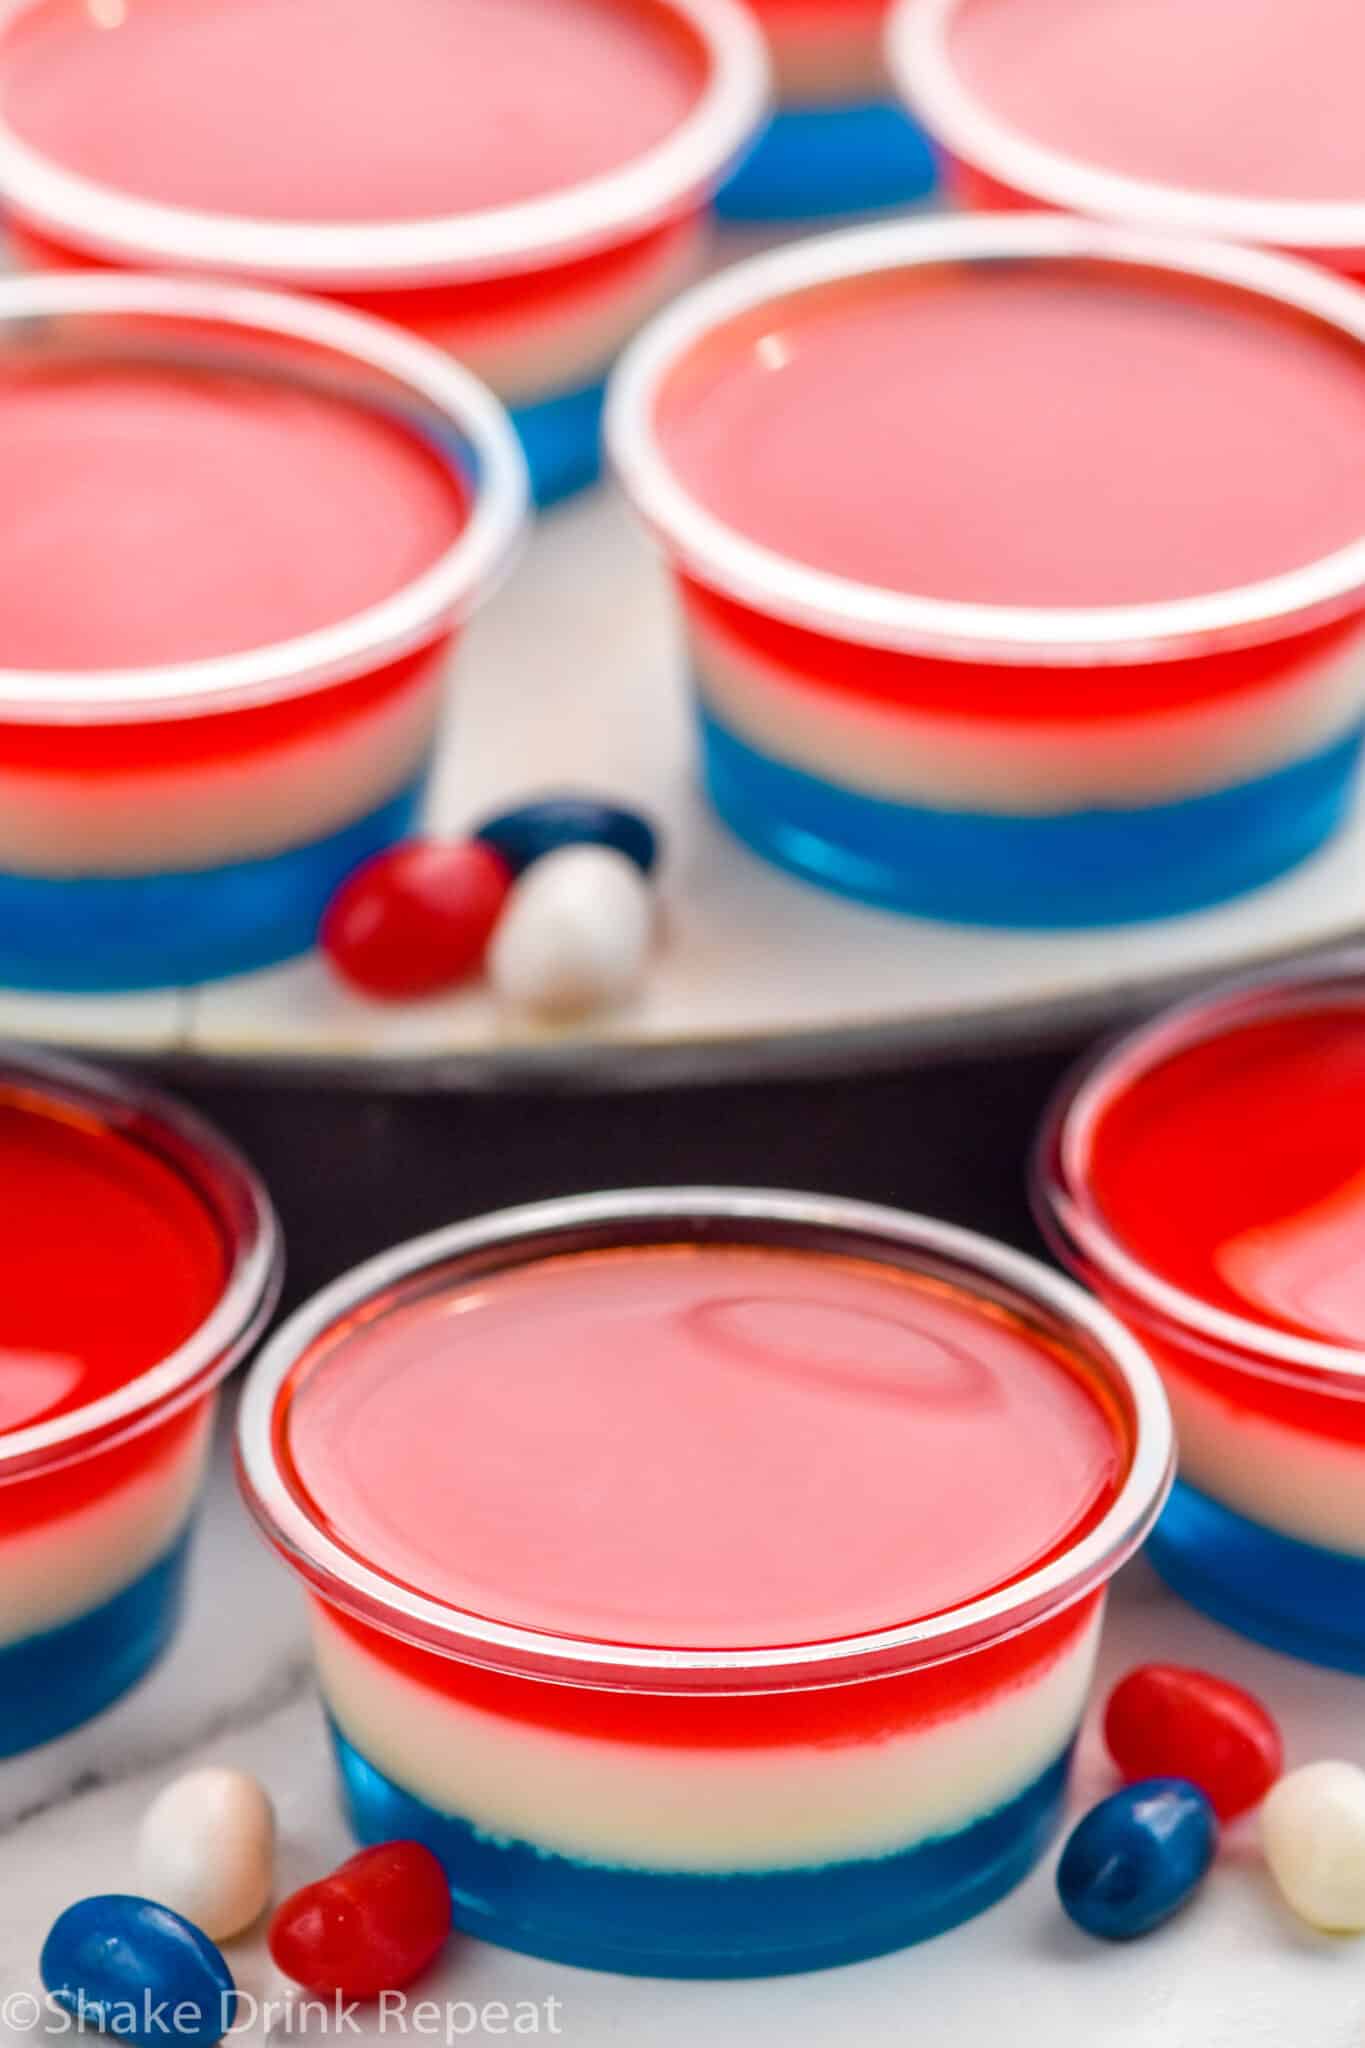 #3: Make These Patriotic 4th of July Jello Shots